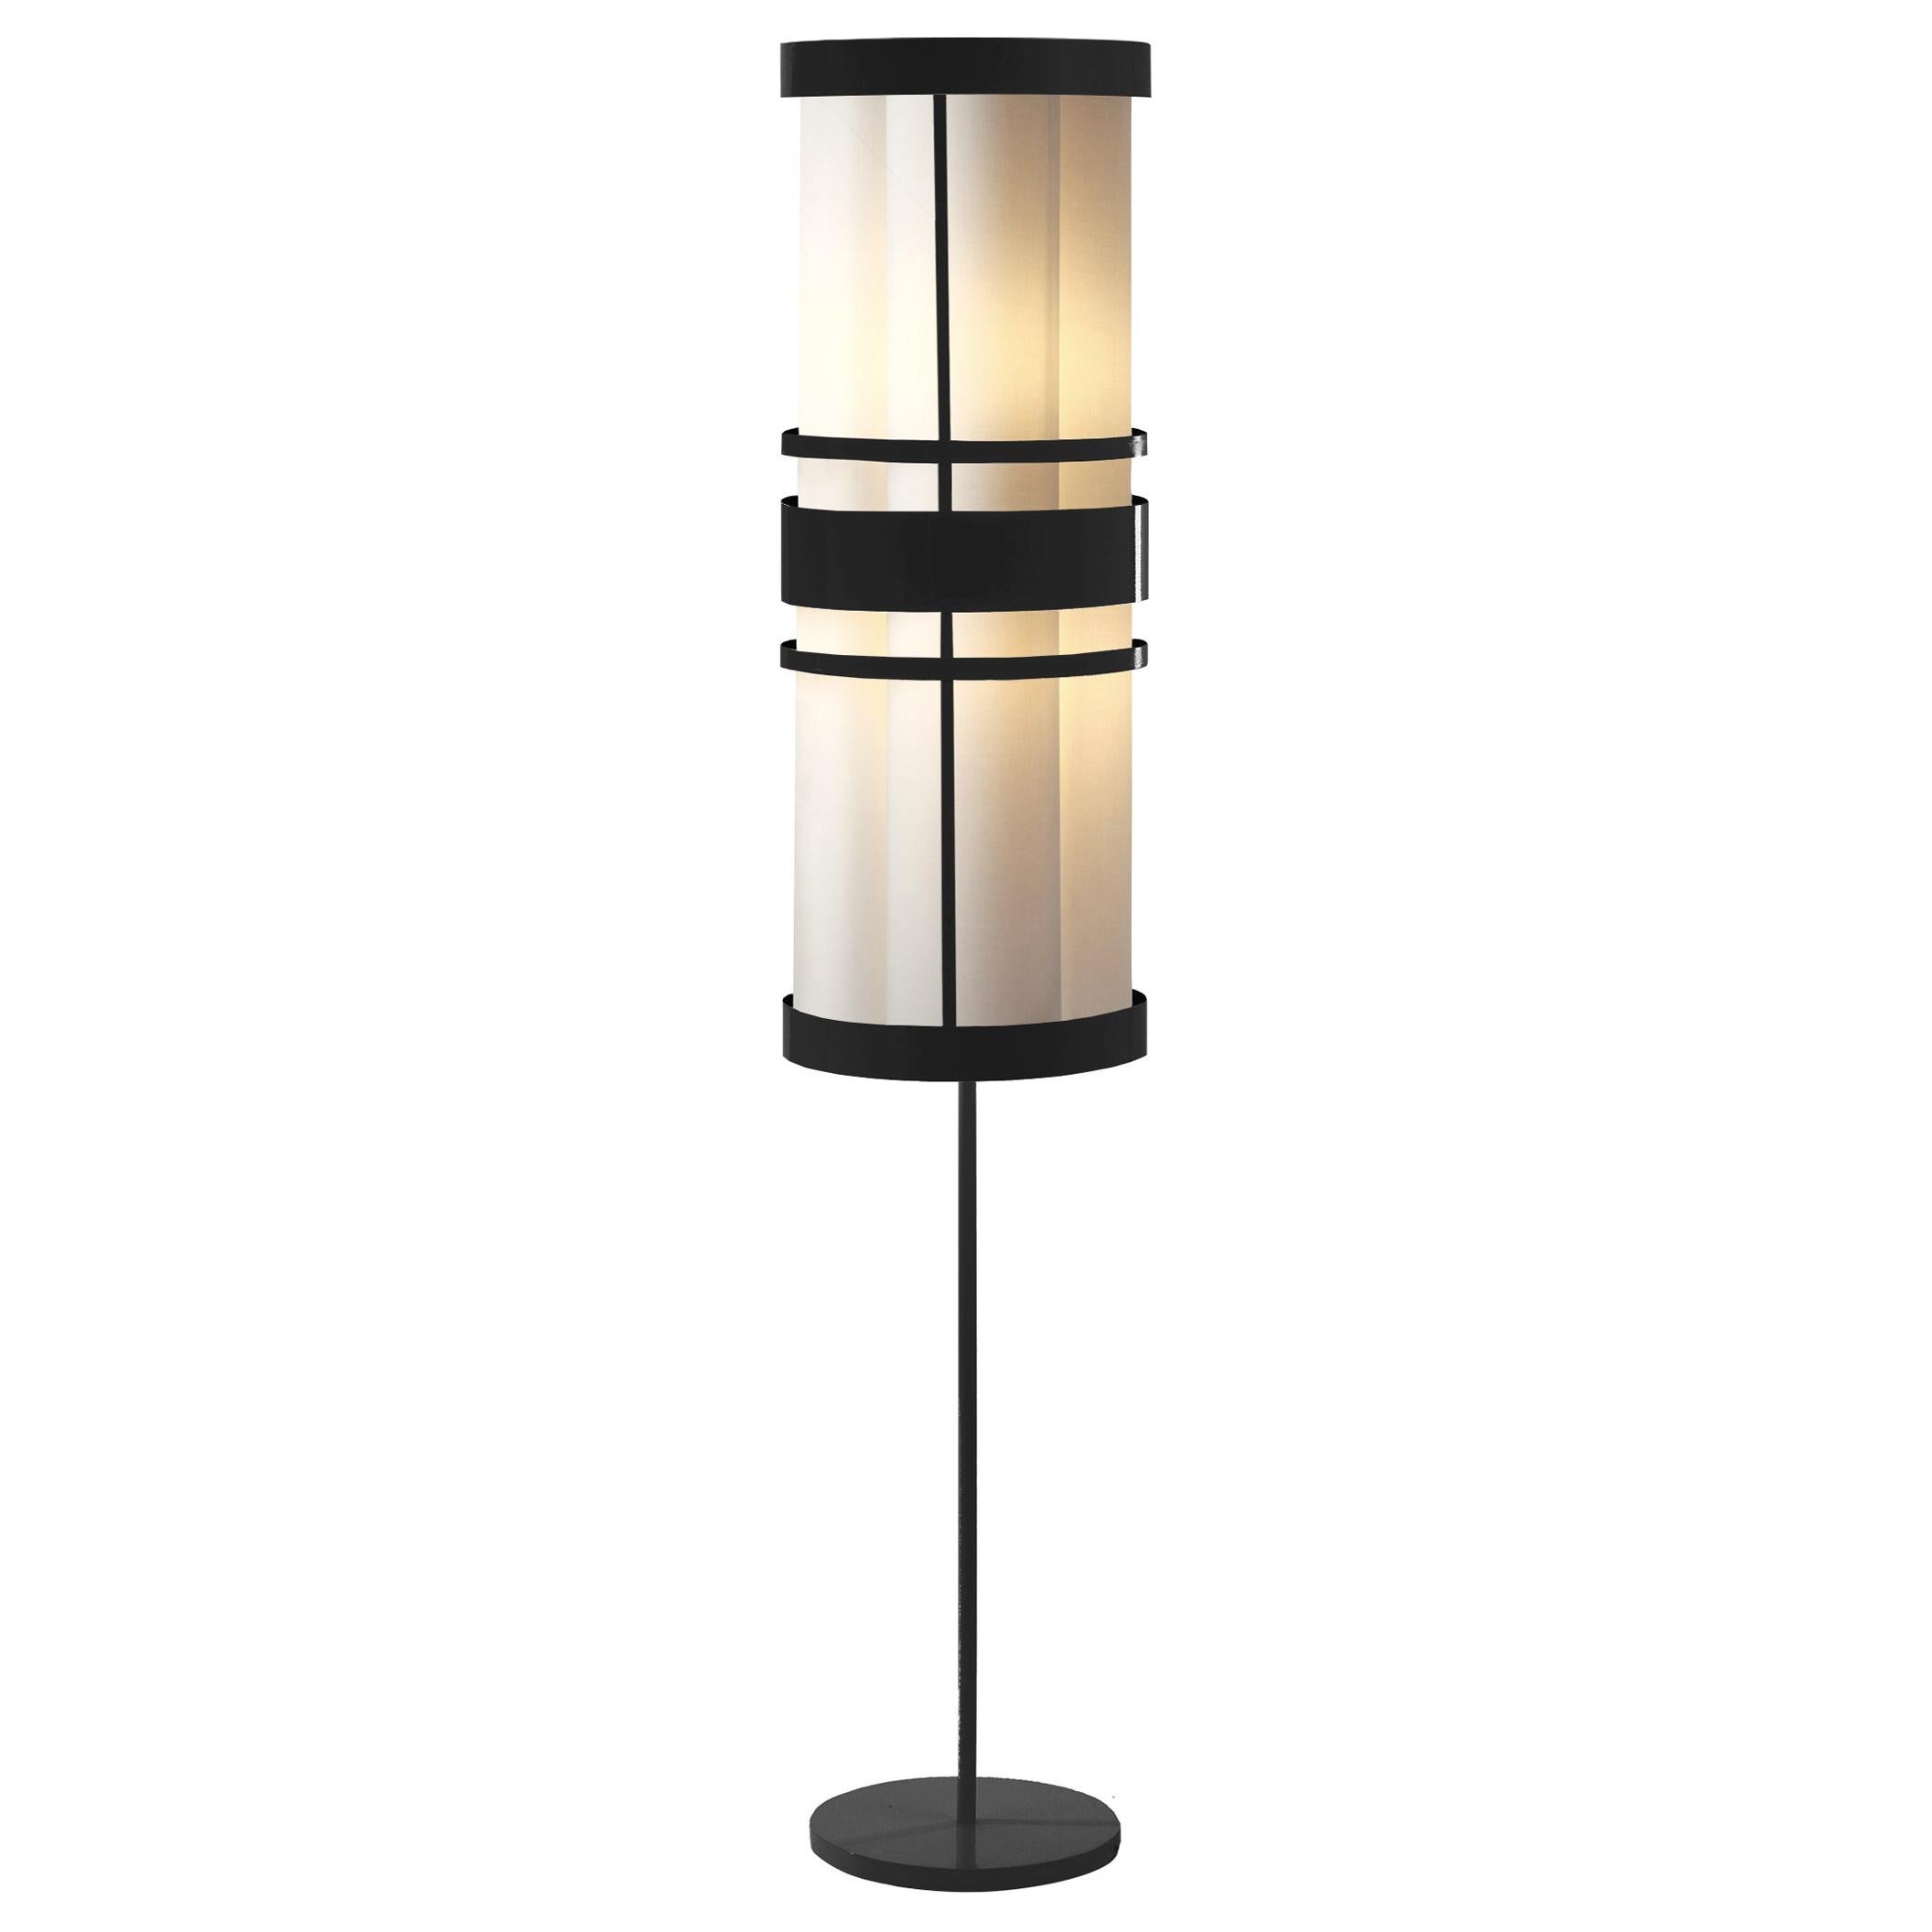 Contemporary Art Deco Inspired Circus Floor Lamp Black Powder Coated For Sale